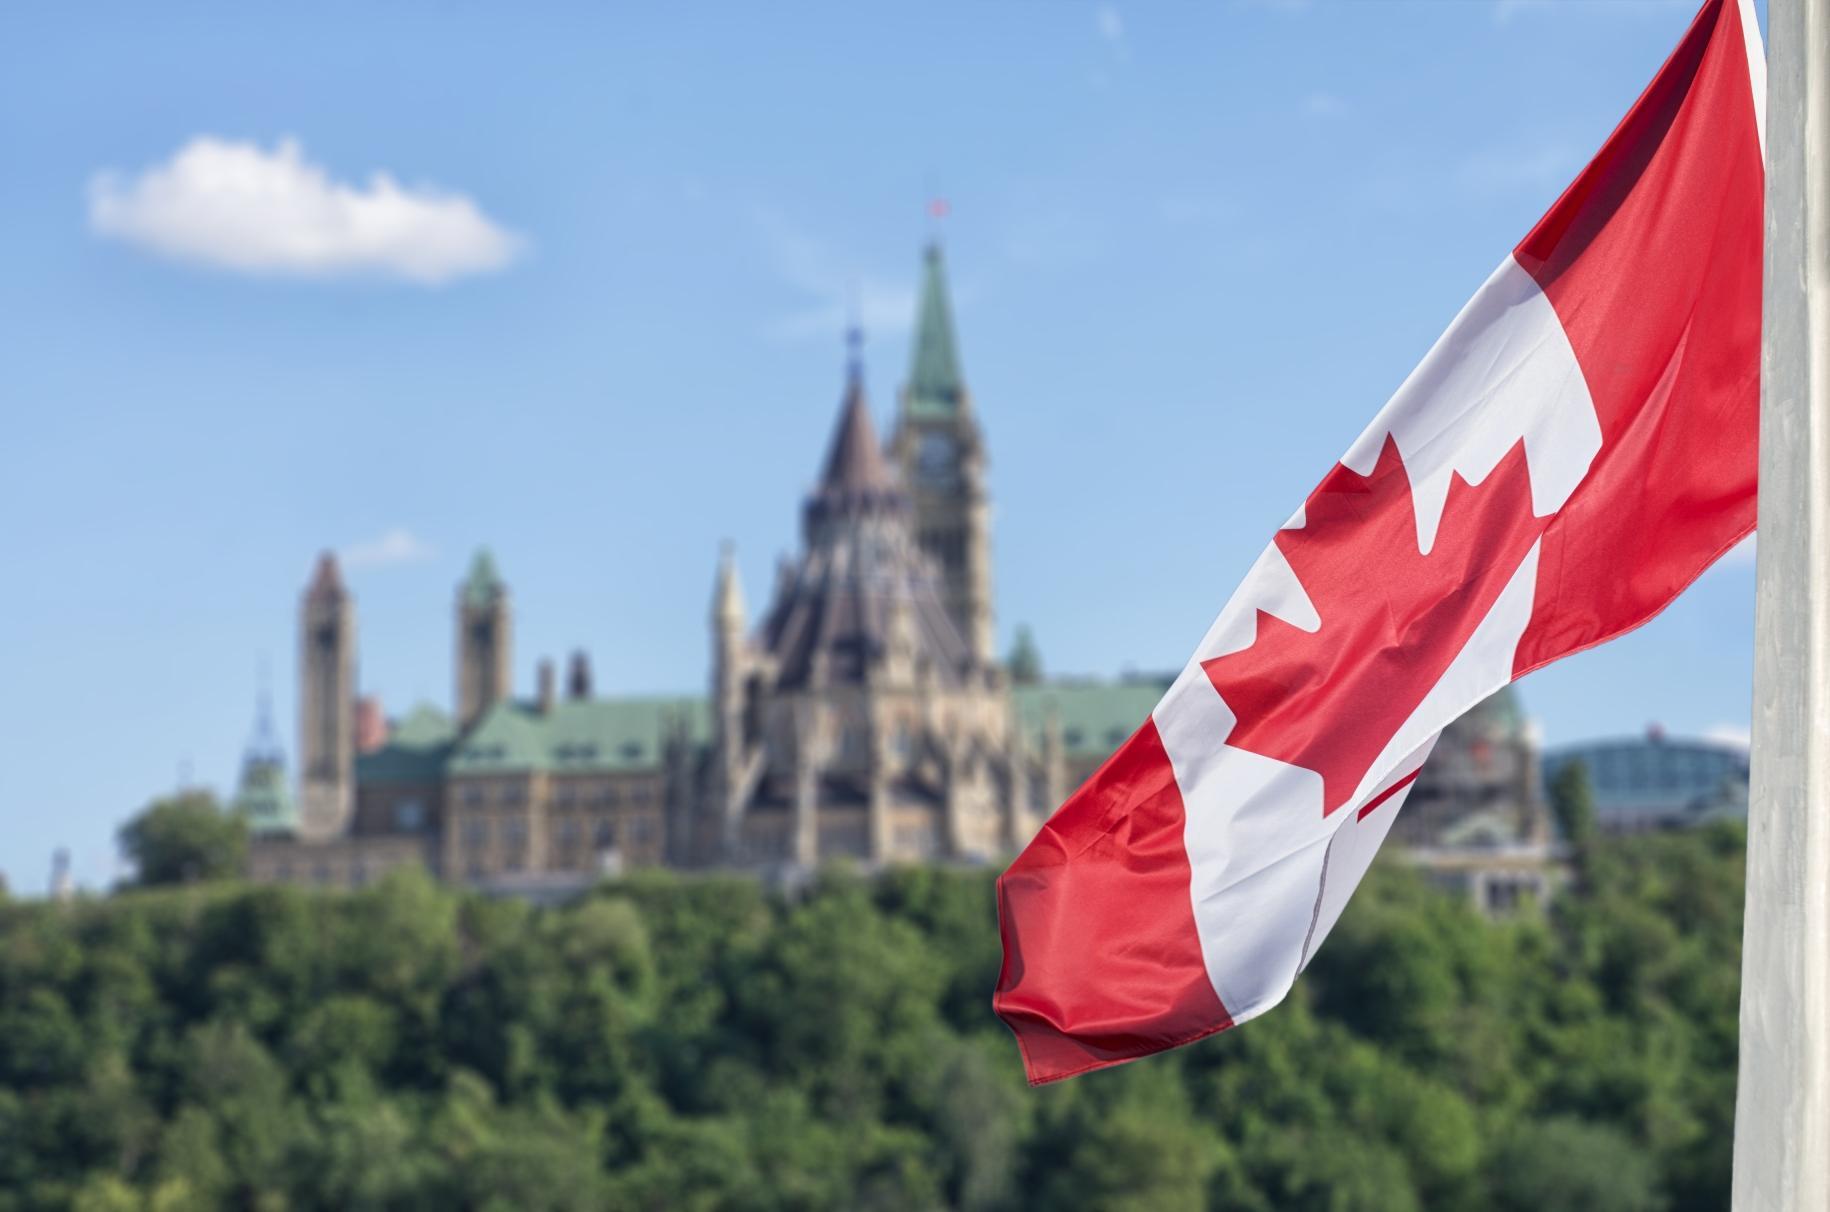 Bill C-13 Aims to Legalize Single Game Sports Betting in Canada in 2021